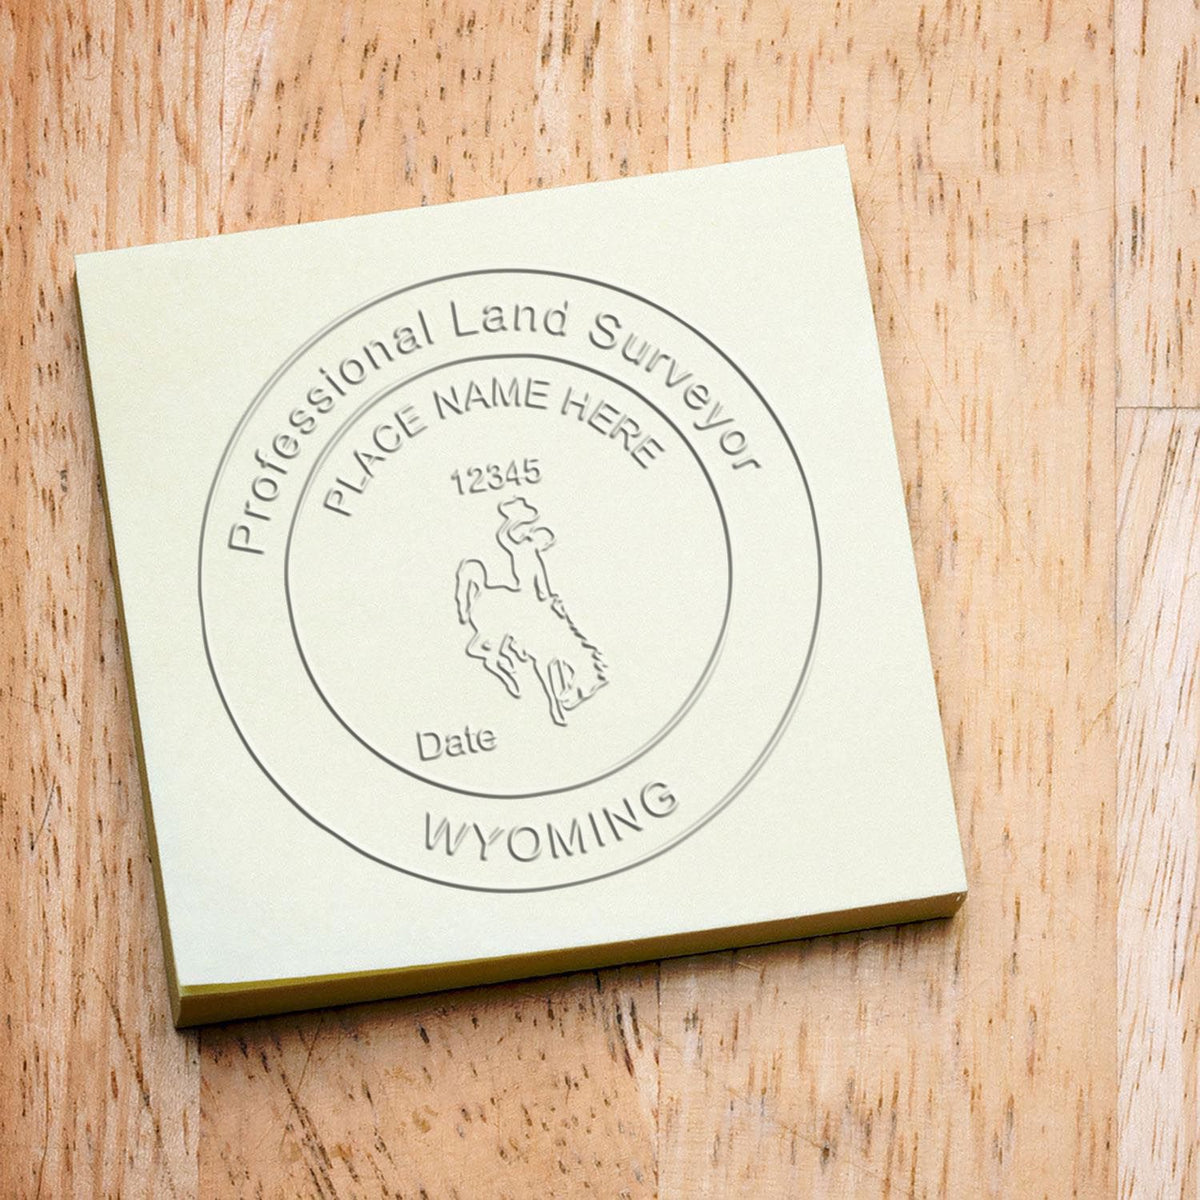 An in use photo of the Gift Wyoming Land Surveyor Seal showing a sample imprint on a cardstock